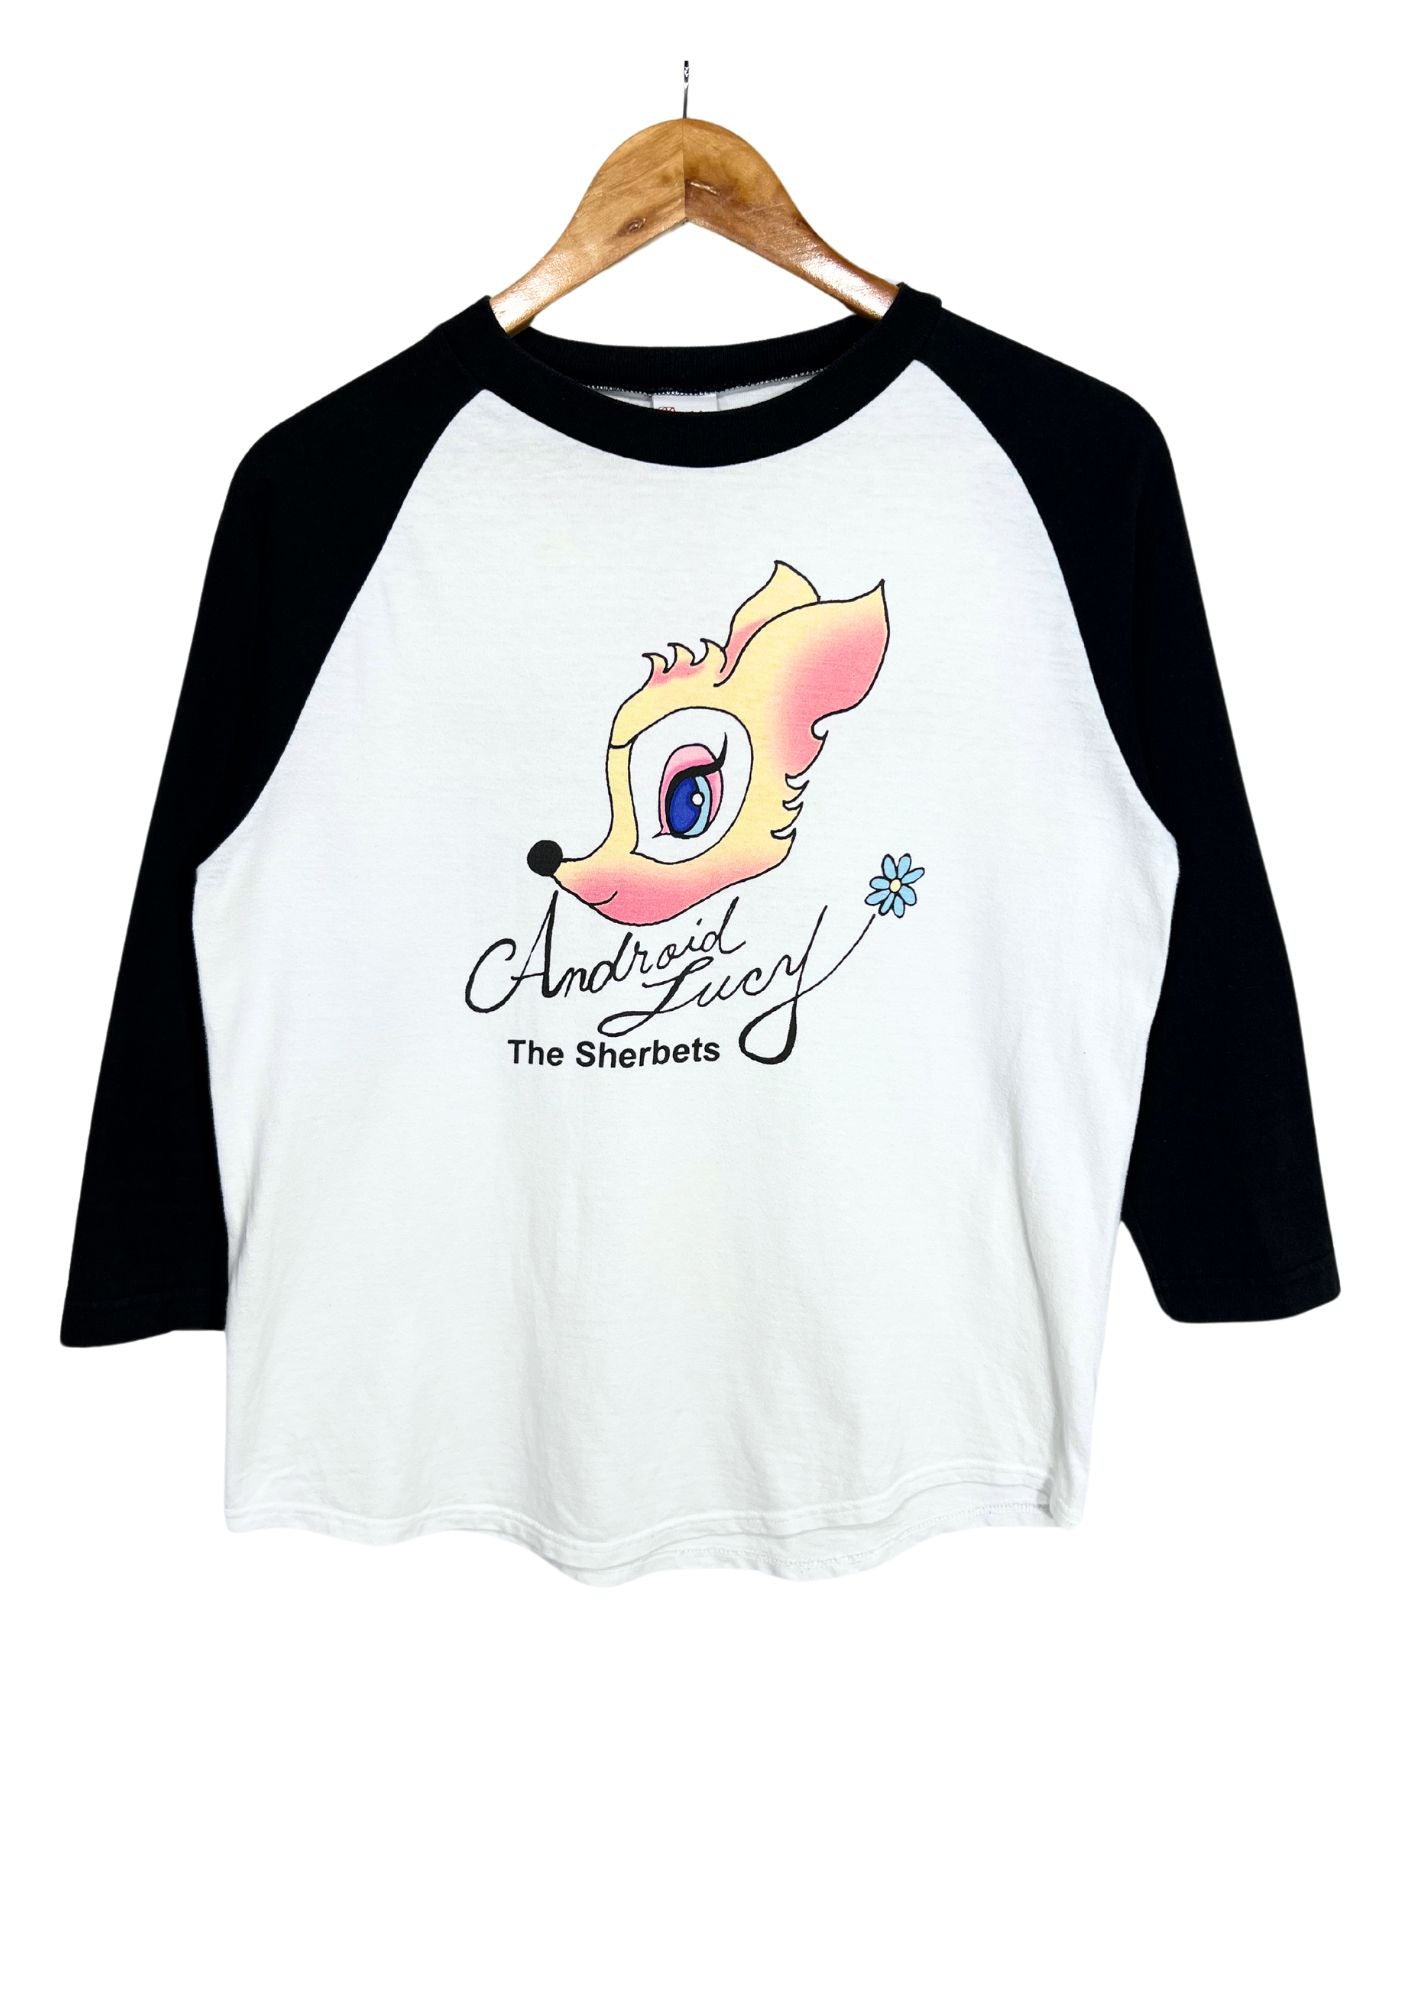 00s SHERBETS 'Android Lucy' Japanese Rock Band Raglan Shirt